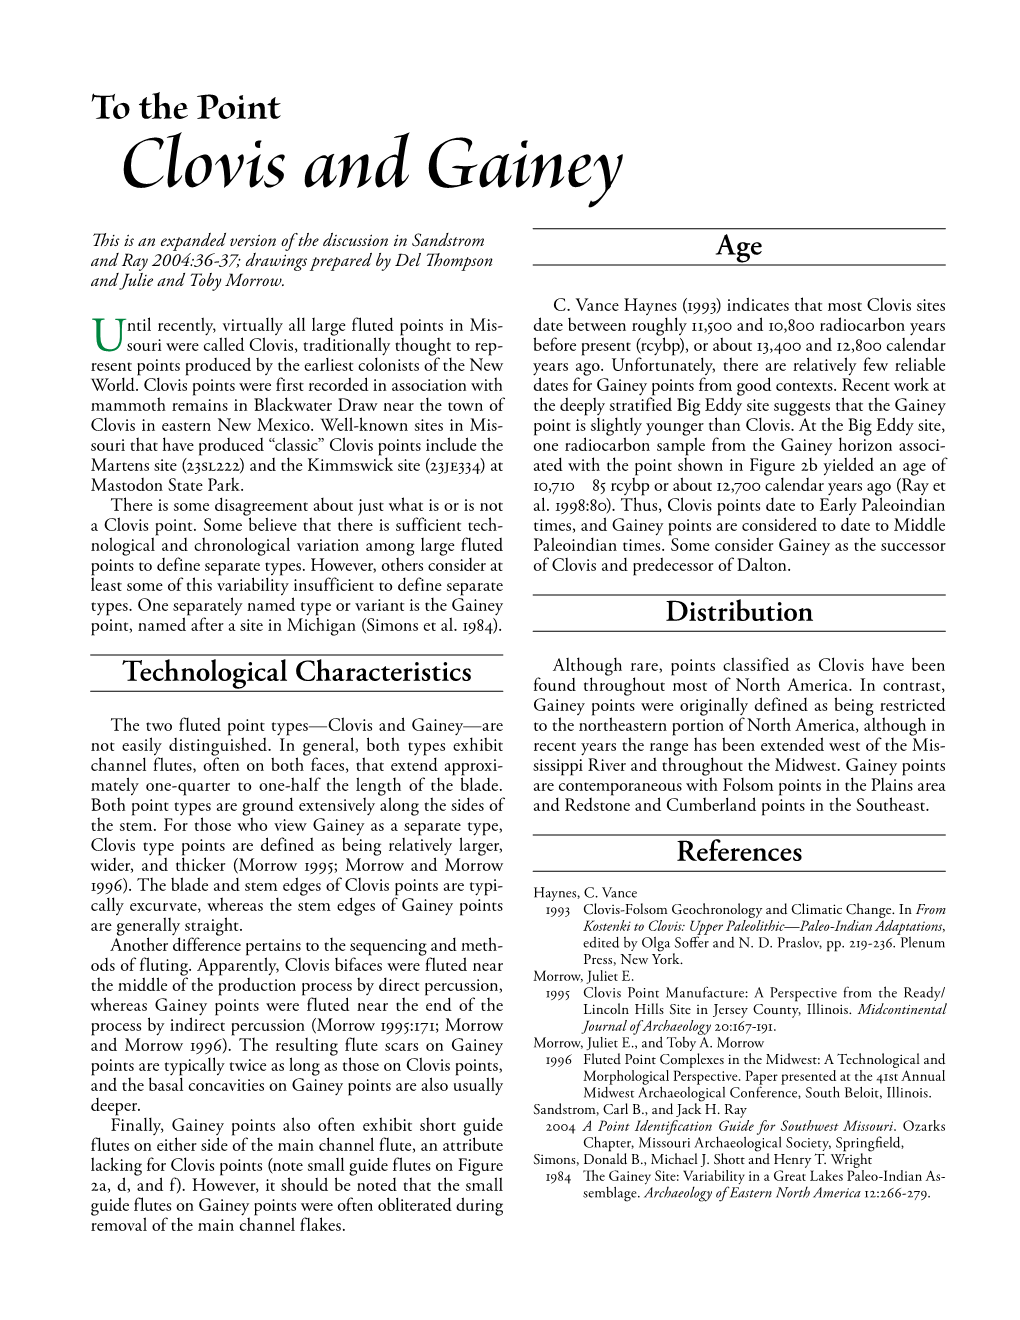 Clovis and Gainey This Is an Expanded Version of the Discussion in Sandstrom Age and Ray 2004:36-37; Drawings Prepared by Del Thompson and Julie and Toby Morrow